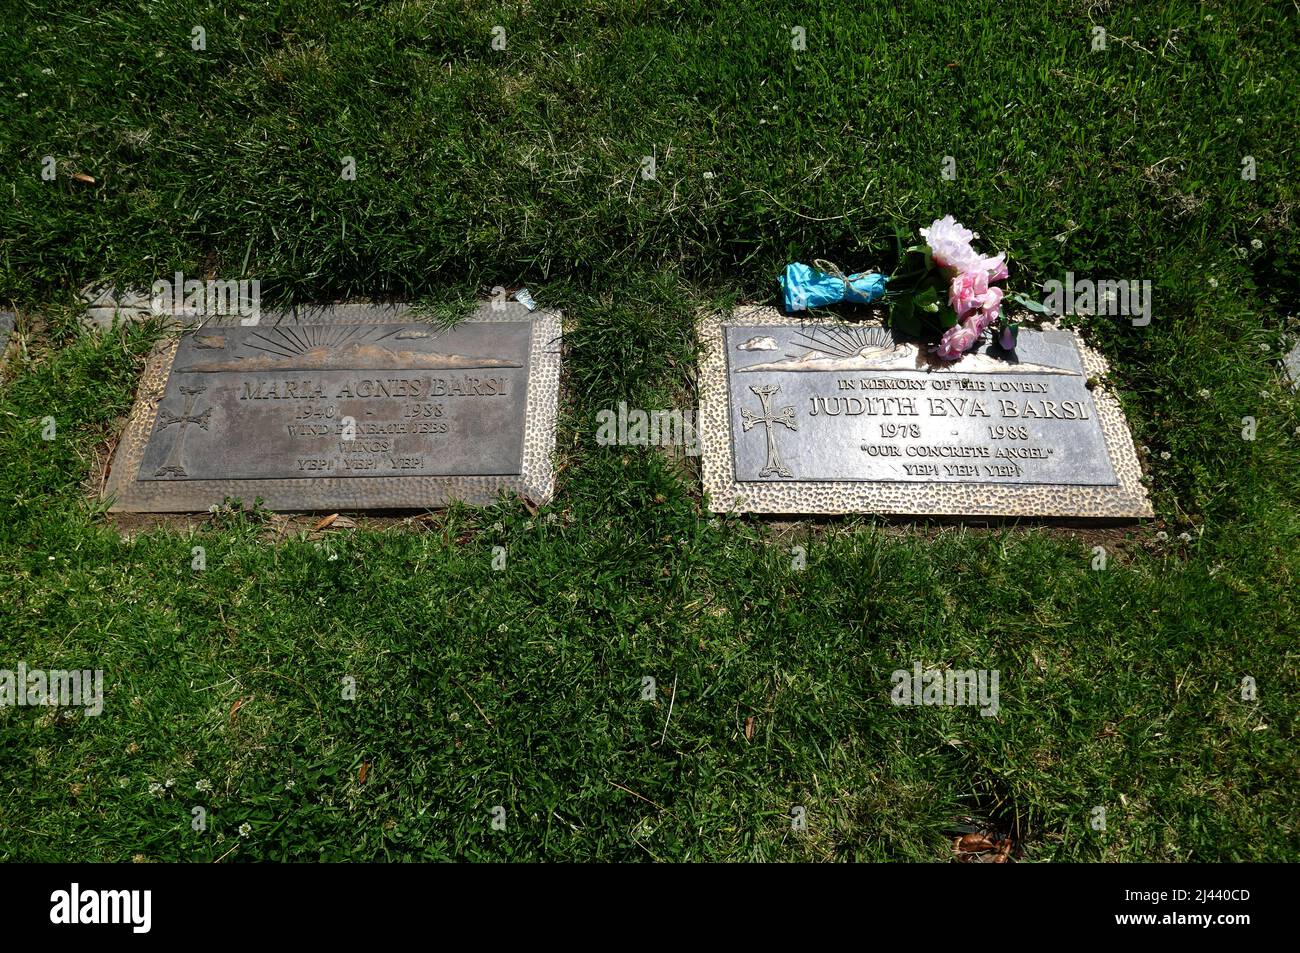 Los Angeles, California, USA 10th April 2022 Actress Judith Barsi's Grave and mother Maria Barsi's Grave at Forest Lawn Memorial Park Hollywood Hills on April 10, 2022 in Los Angeles, California, USA. Photo by Barry King/Alamy Stock Photo Stock Photo